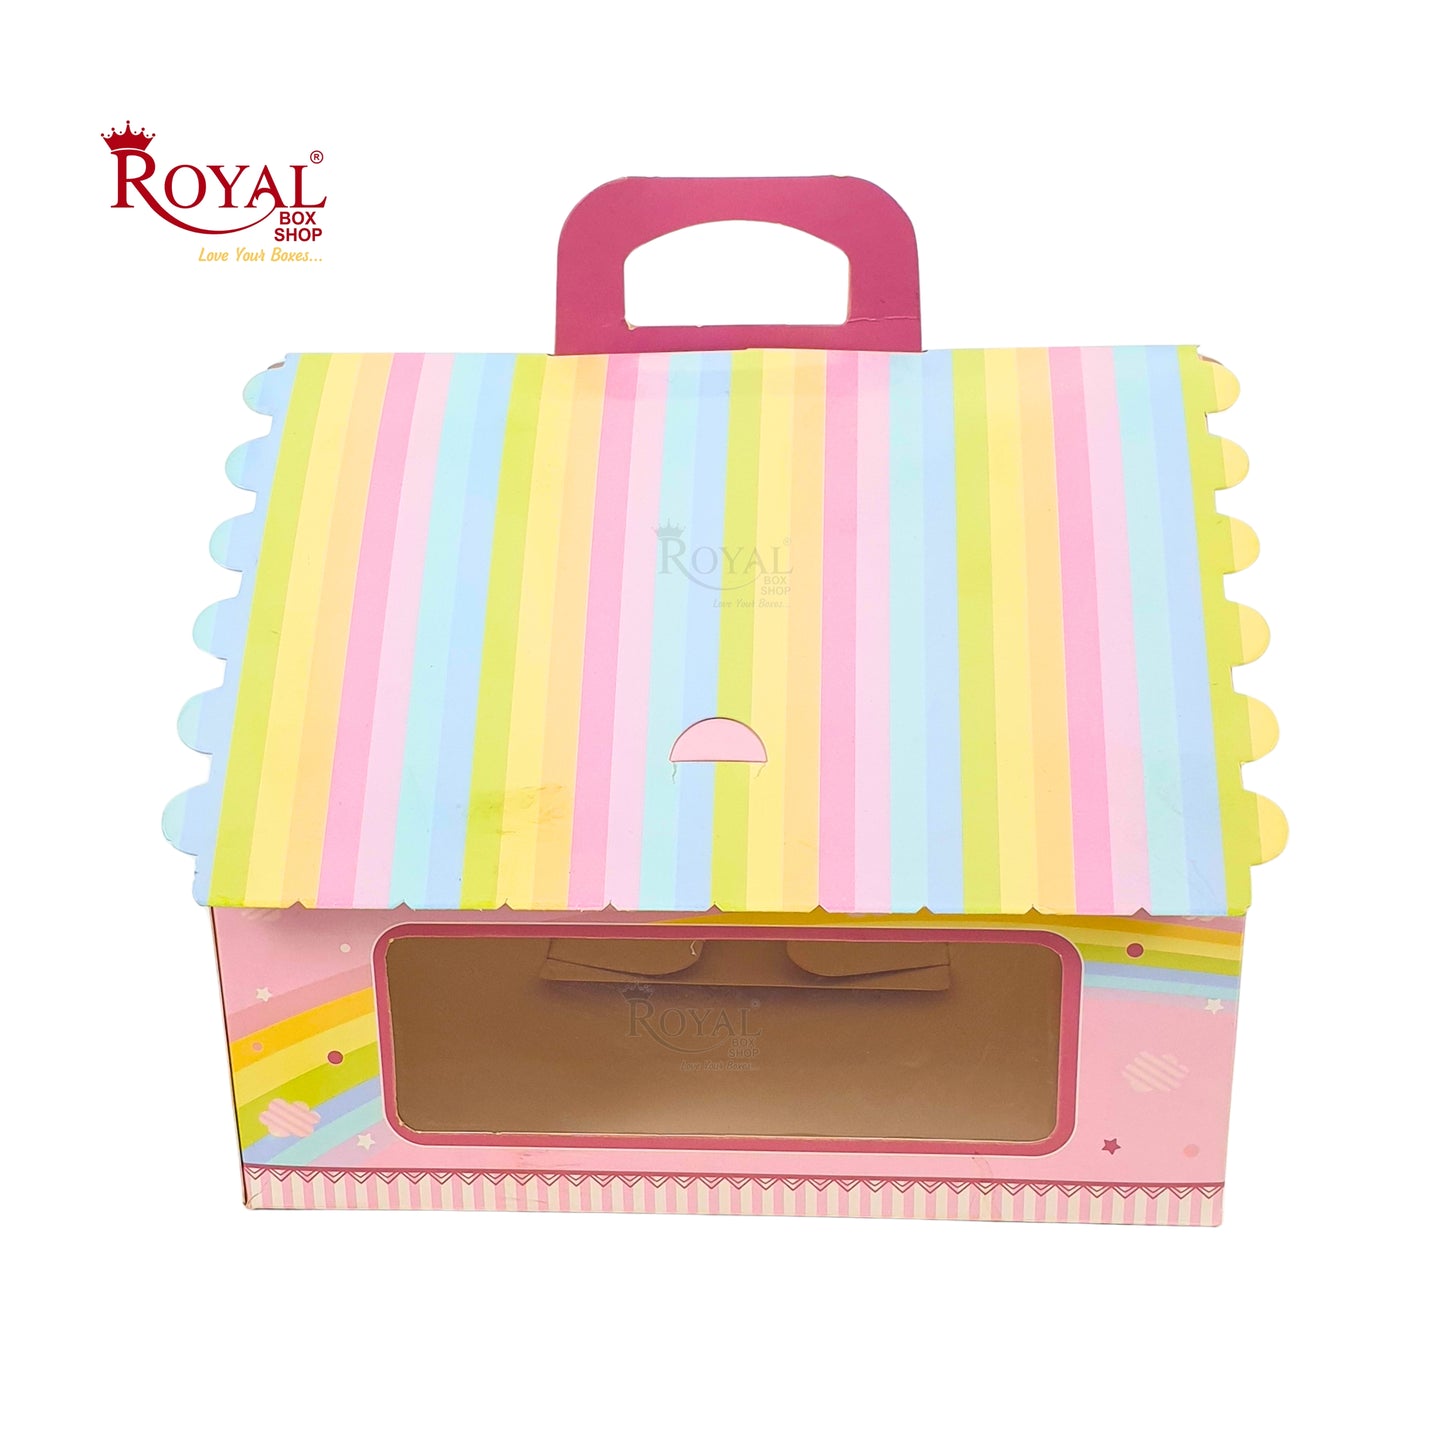 Baby Pink Elephant Hut Gift Box - 9.75 x 9.75 x 4 Inches